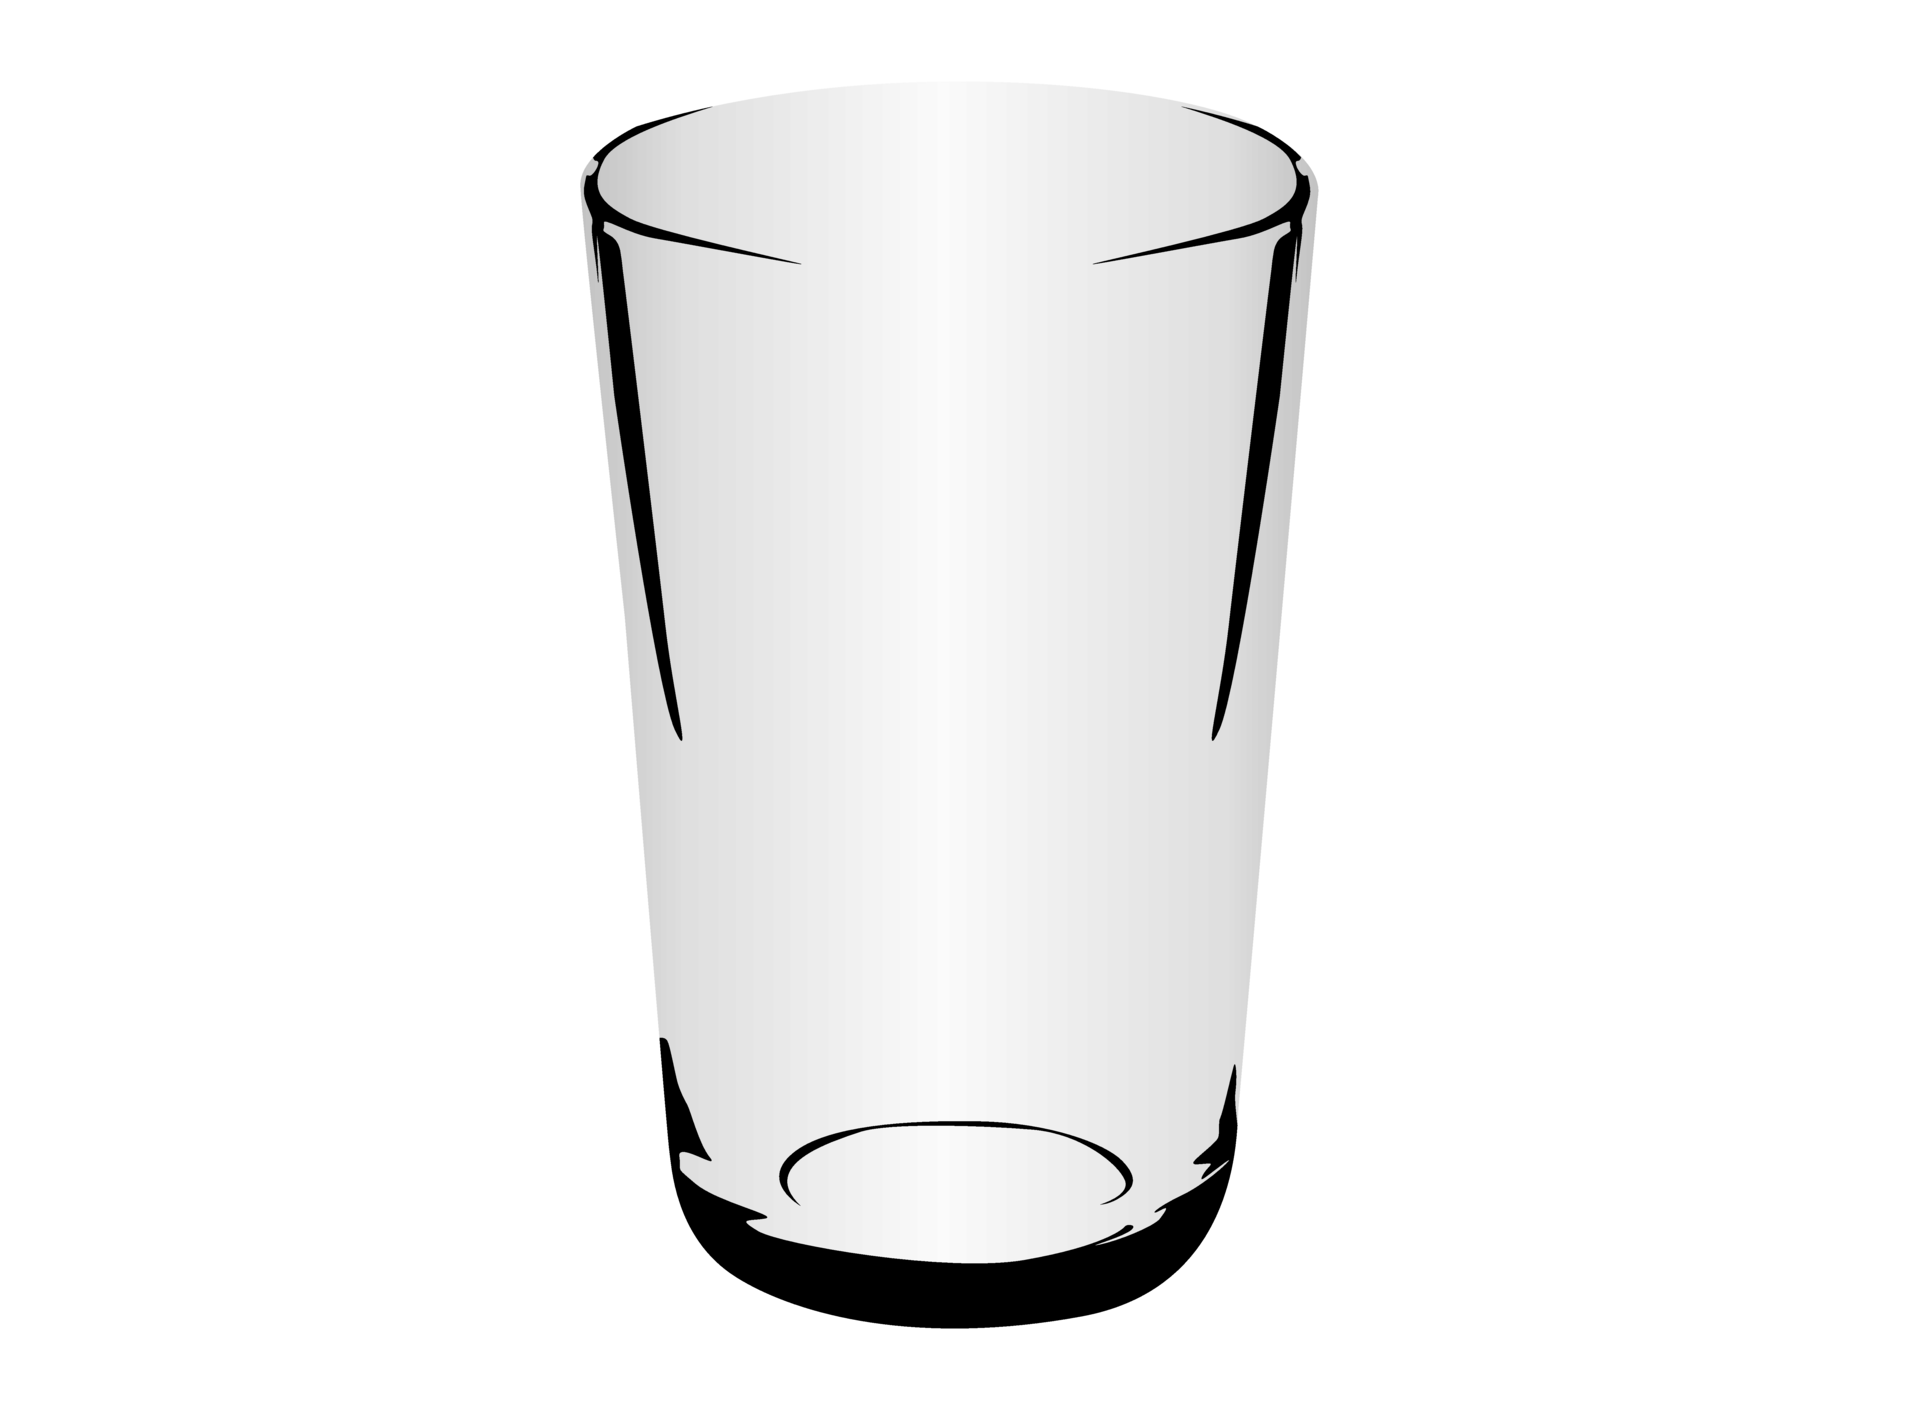 https://static.vecteezy.com/system/resources/previews/016/659/373/original/transparent-drinking-glass-free-png.png